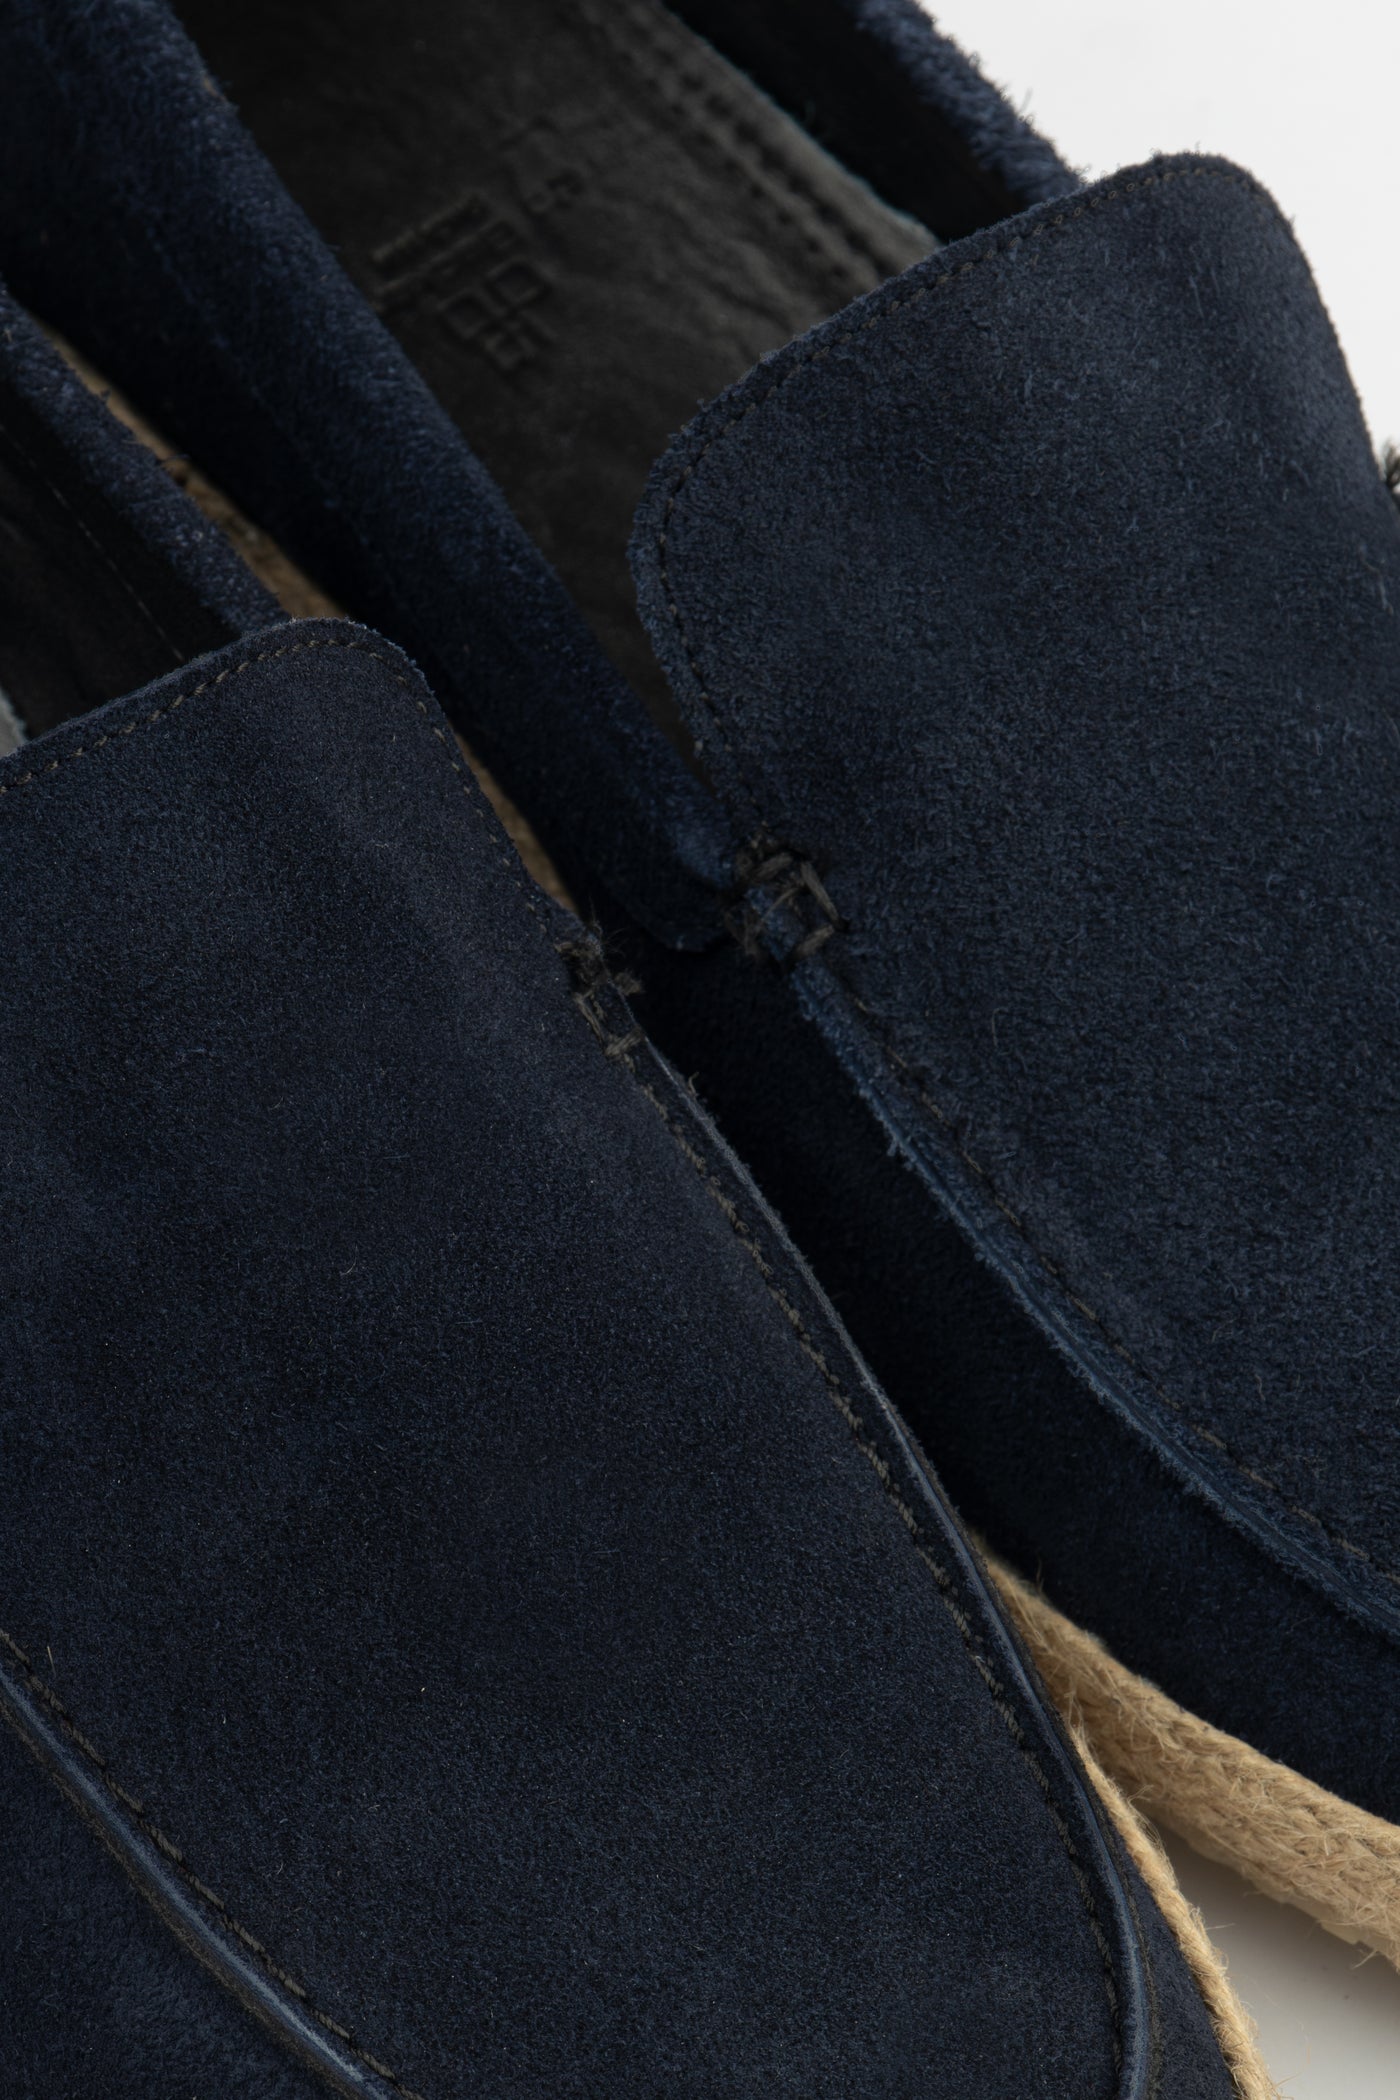 Moccasin Dark Navy Chamois Shoes